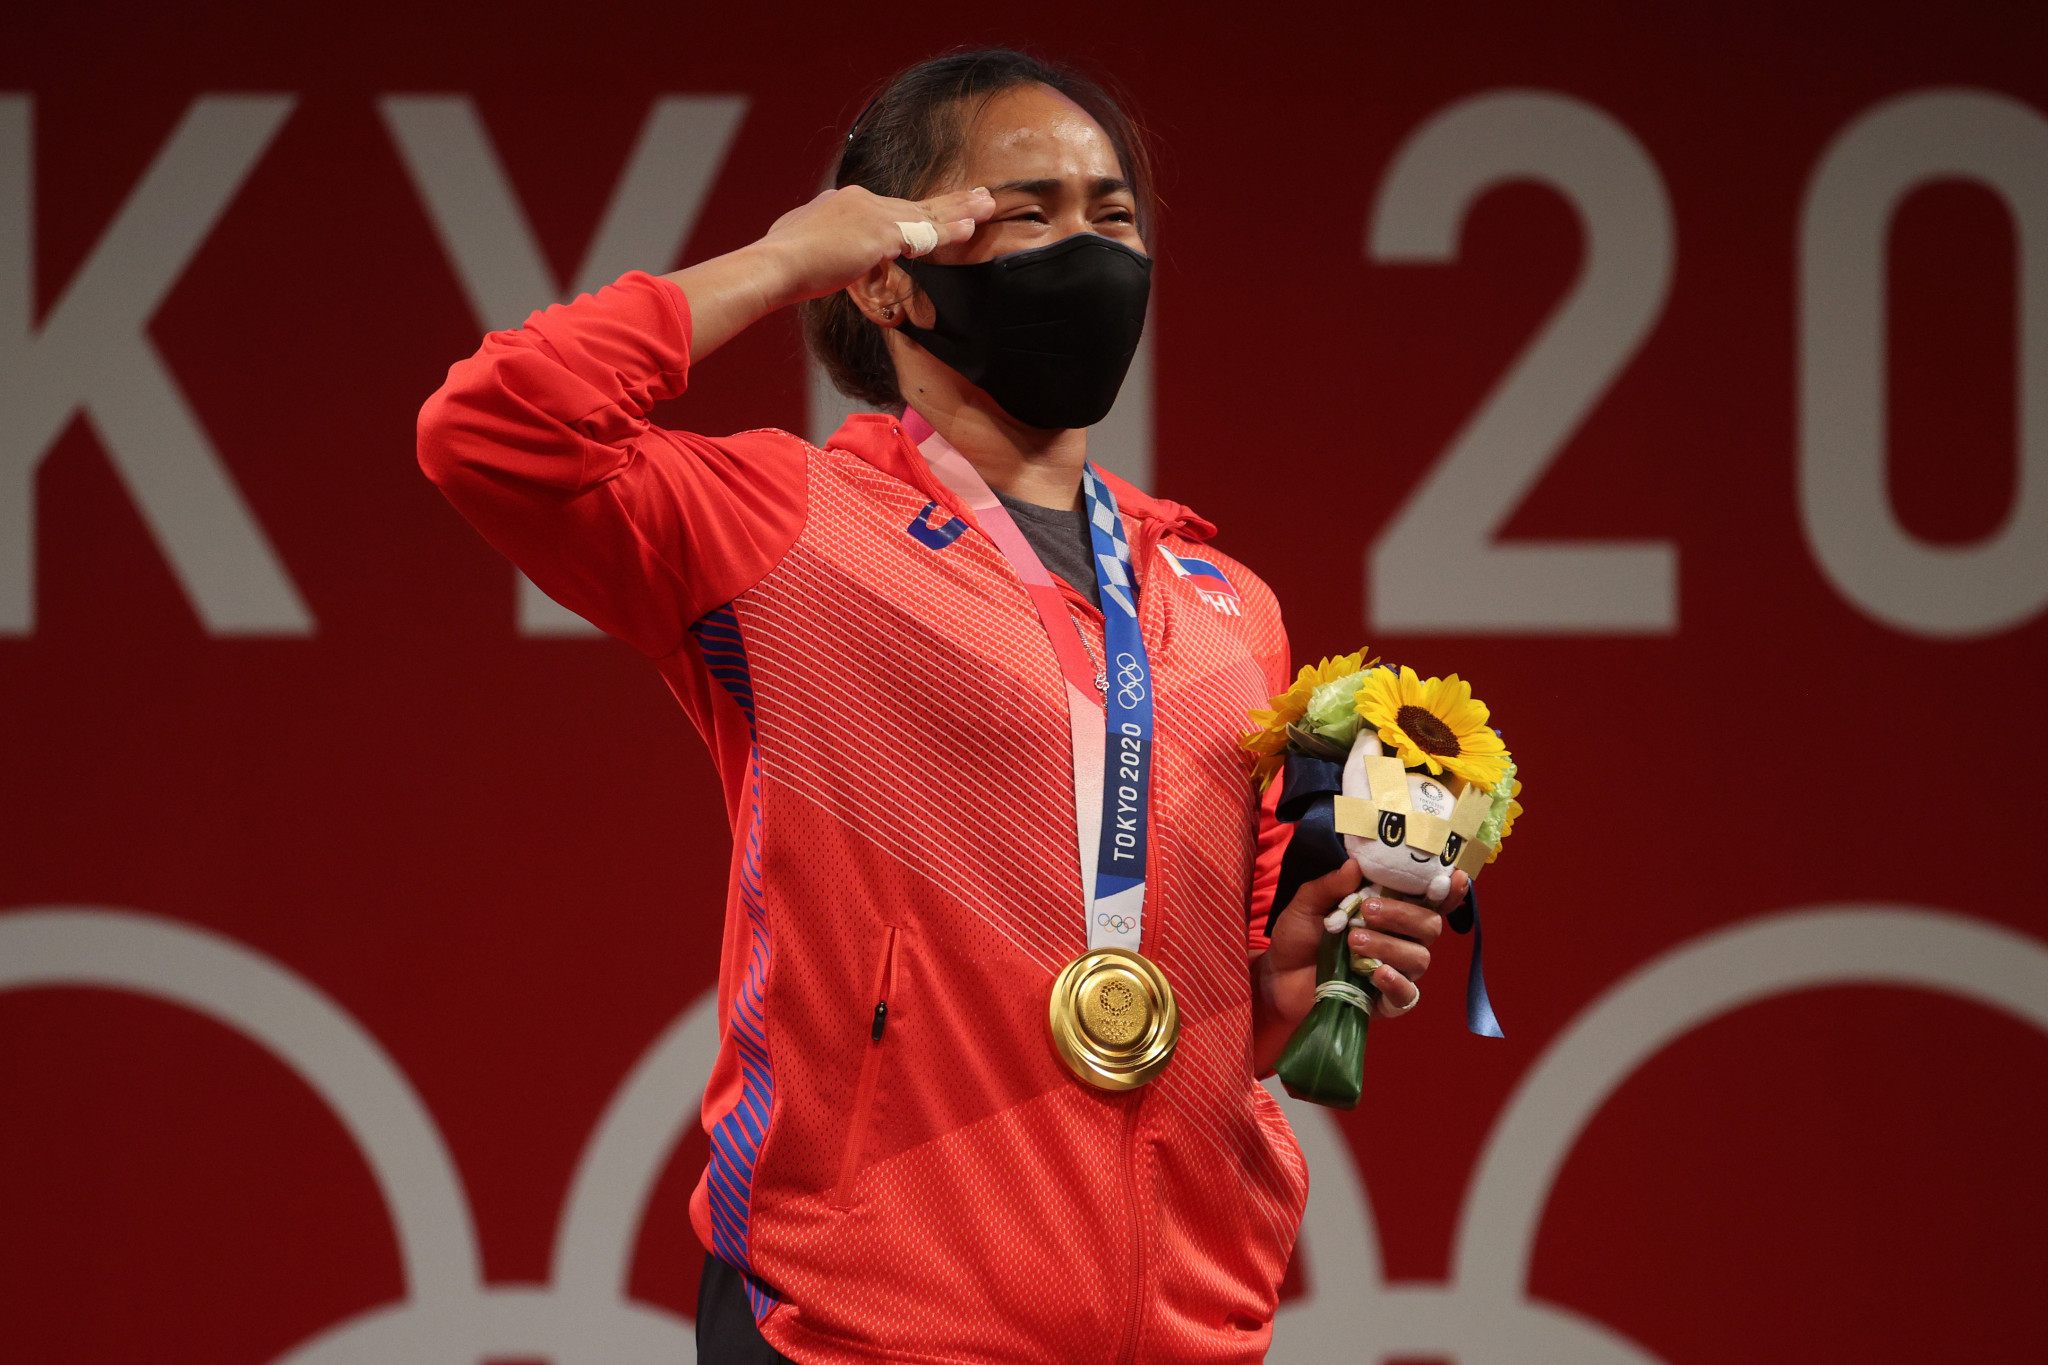 Weightlifter Hidilyn Diaz received a statement from the Philippines Presidential Palace after winning the country's first Olympic gold at Tokyo 2020 ©Getty Images